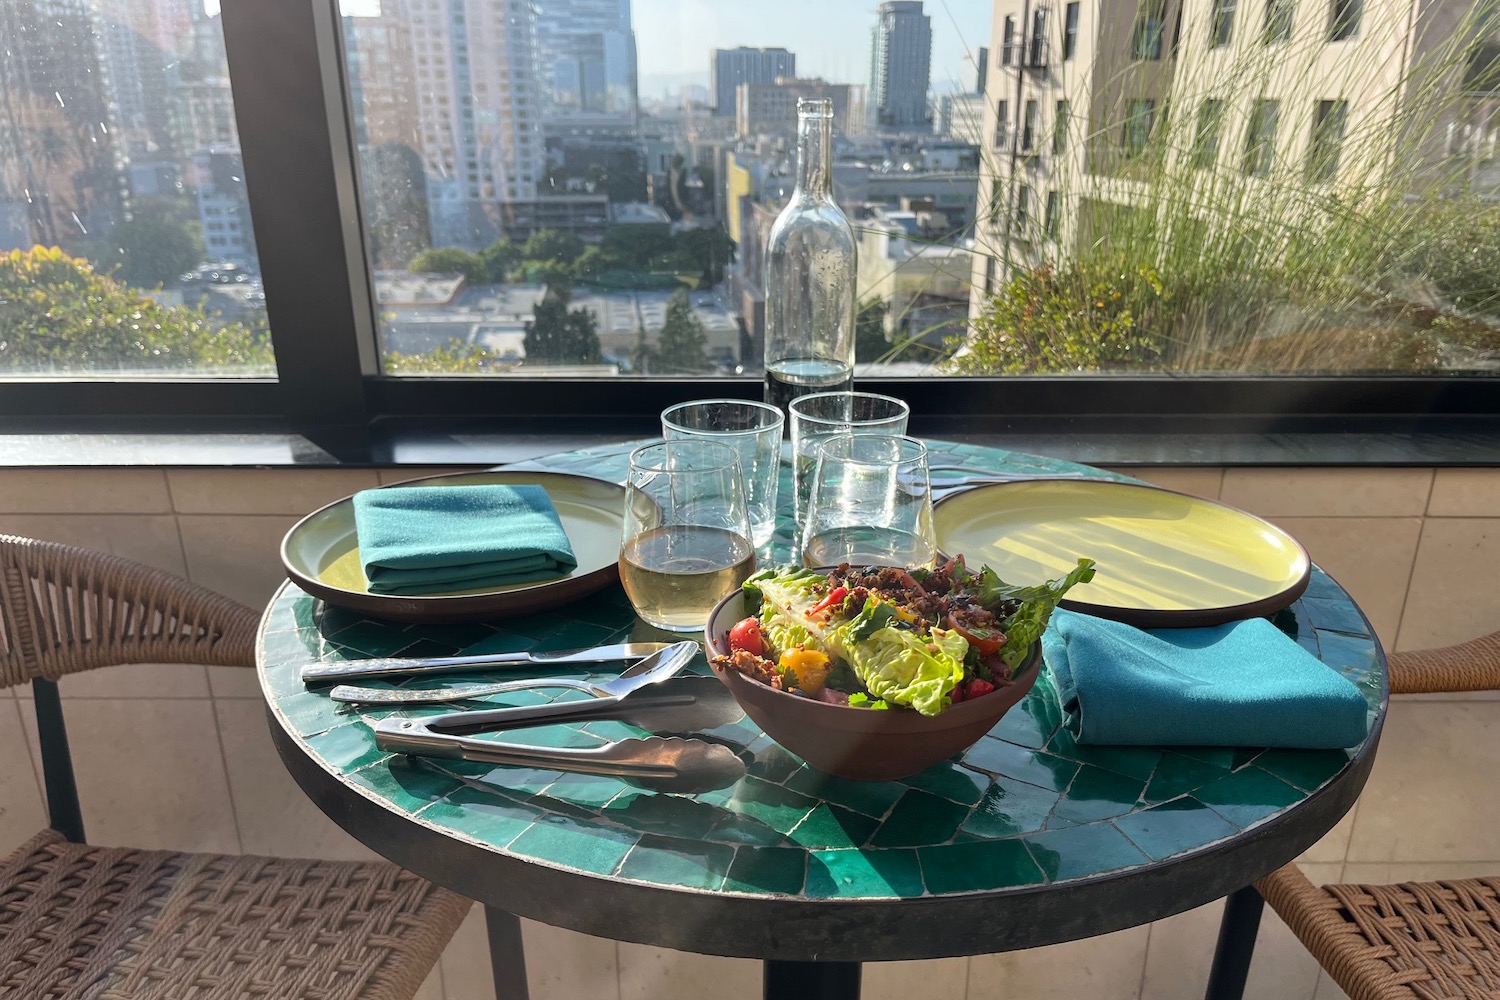 A set table at Cabra, including a garden salad, glasses of white wine, and a stunning view of Downtown Los Angeles.